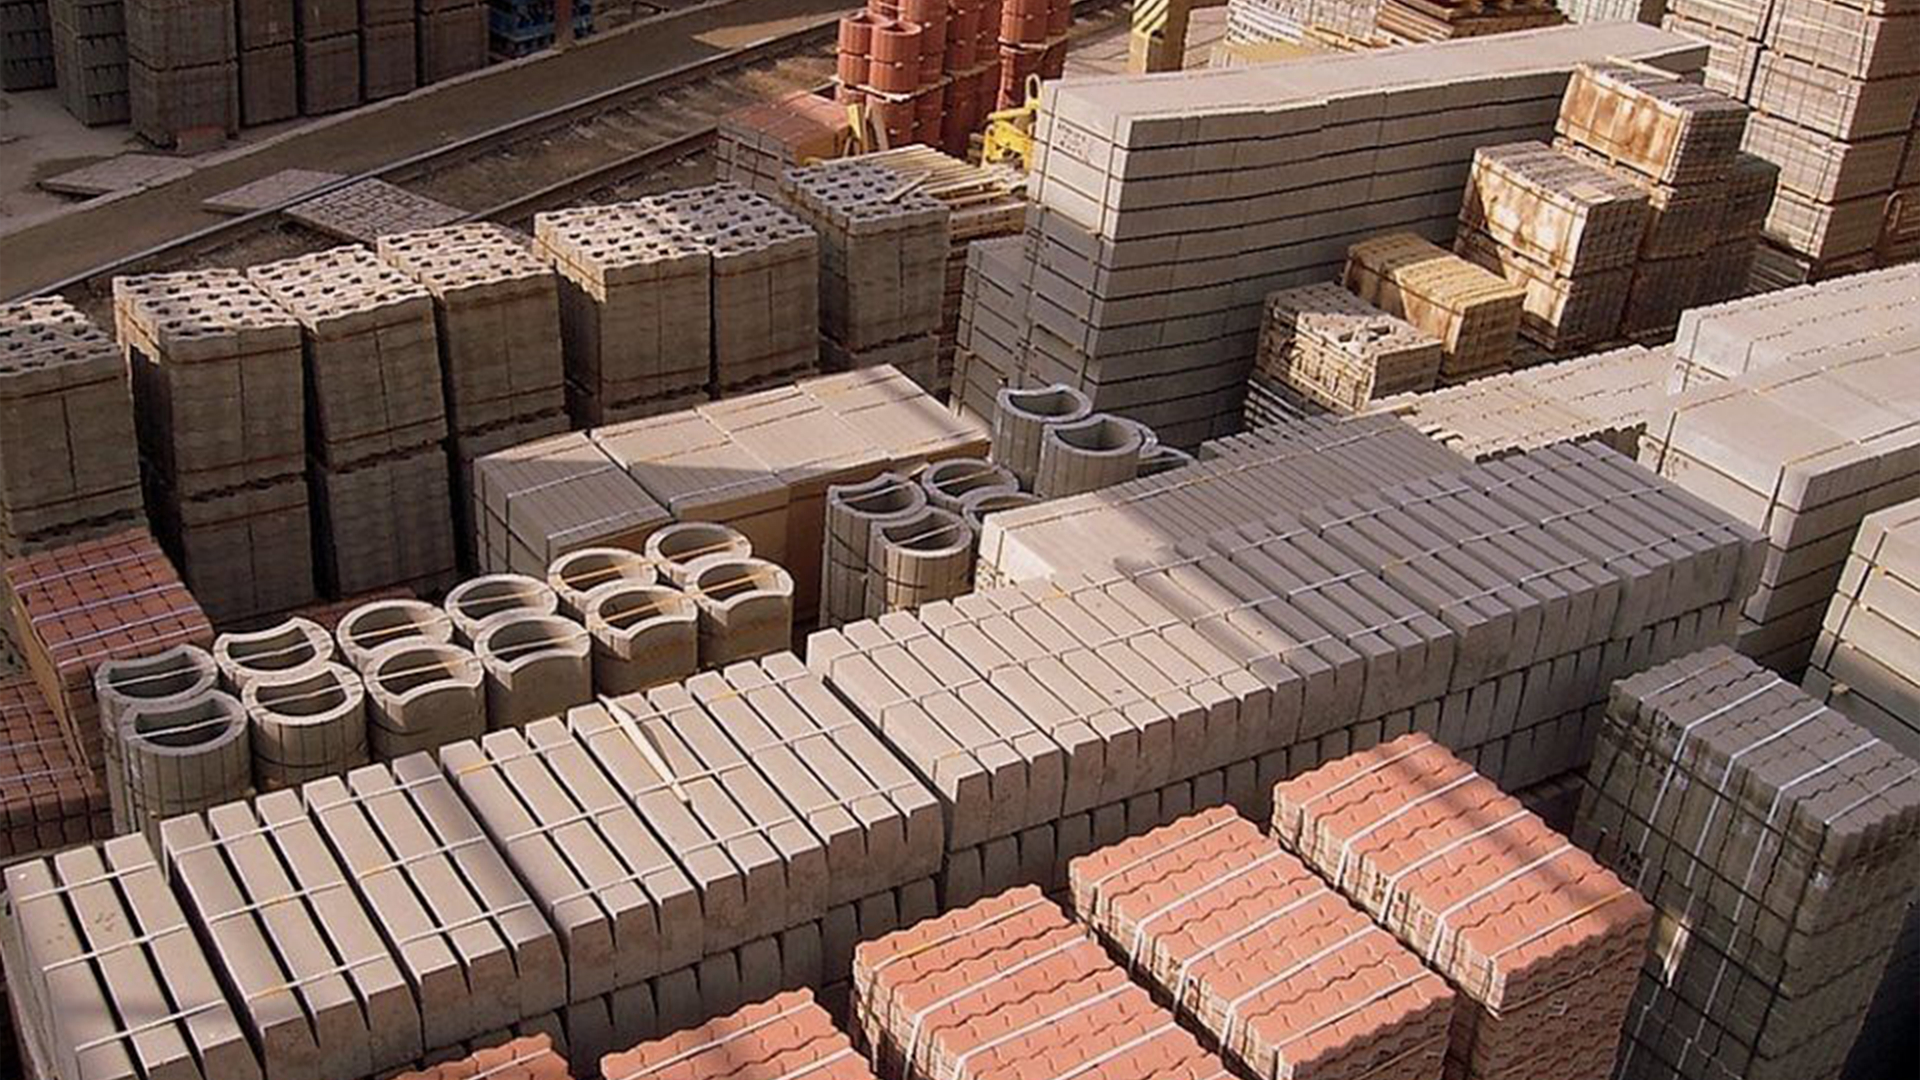 We connect sellers and buyers in the construction materials market